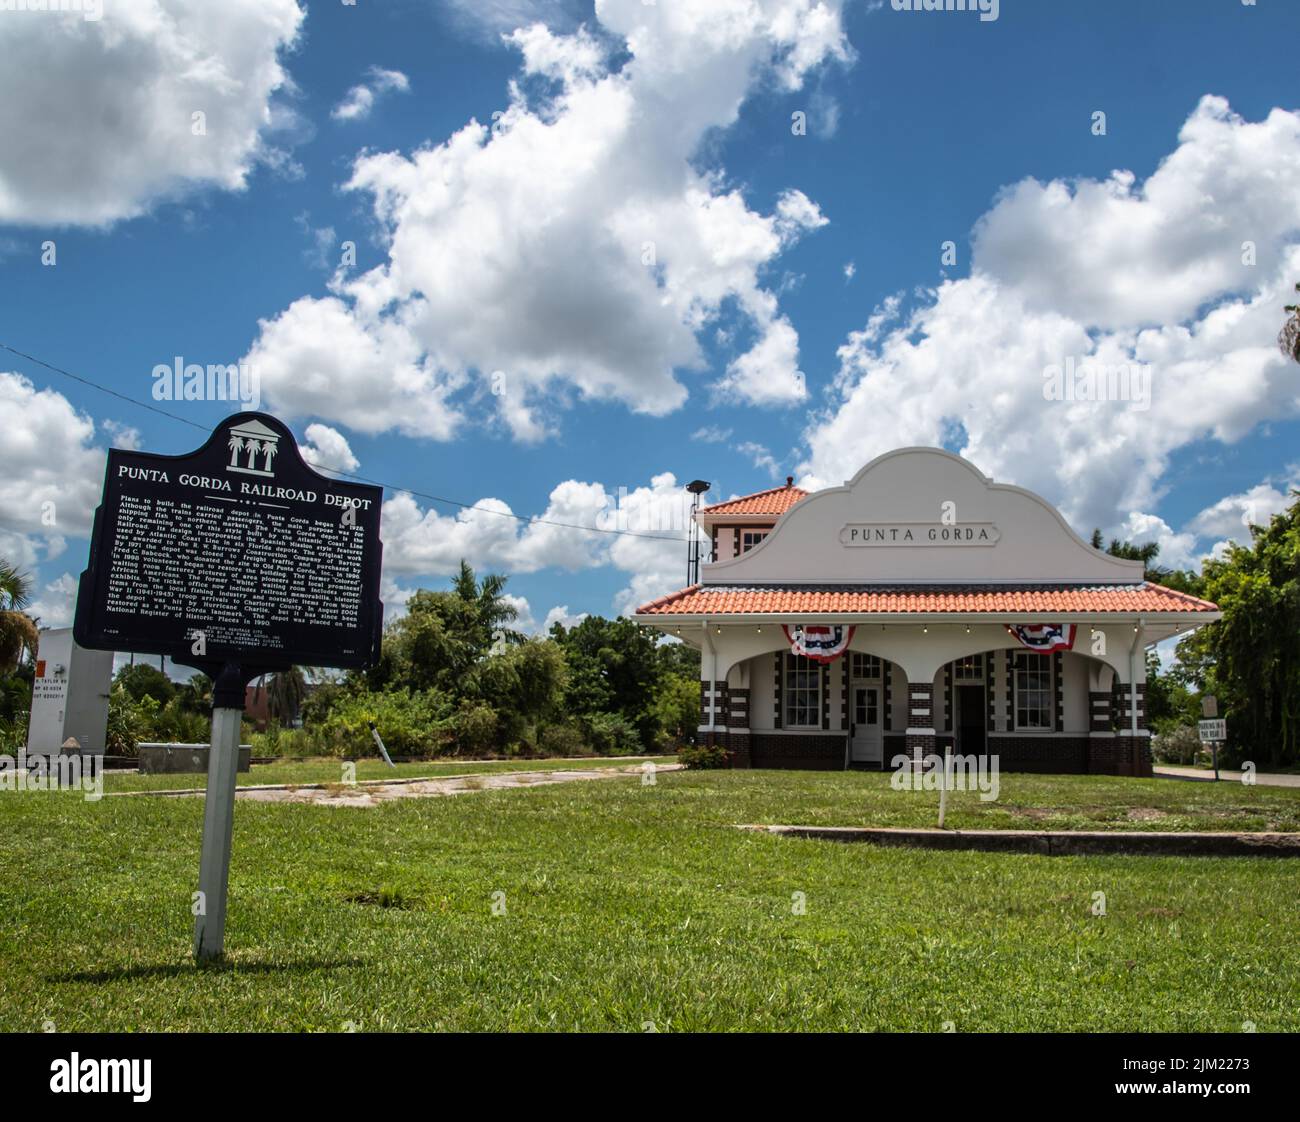 Punta Gorda, Florida: Historic Railroad Train Station, Important Black History Building with Museum segregation history and Jim Crow in the South Stock Photo